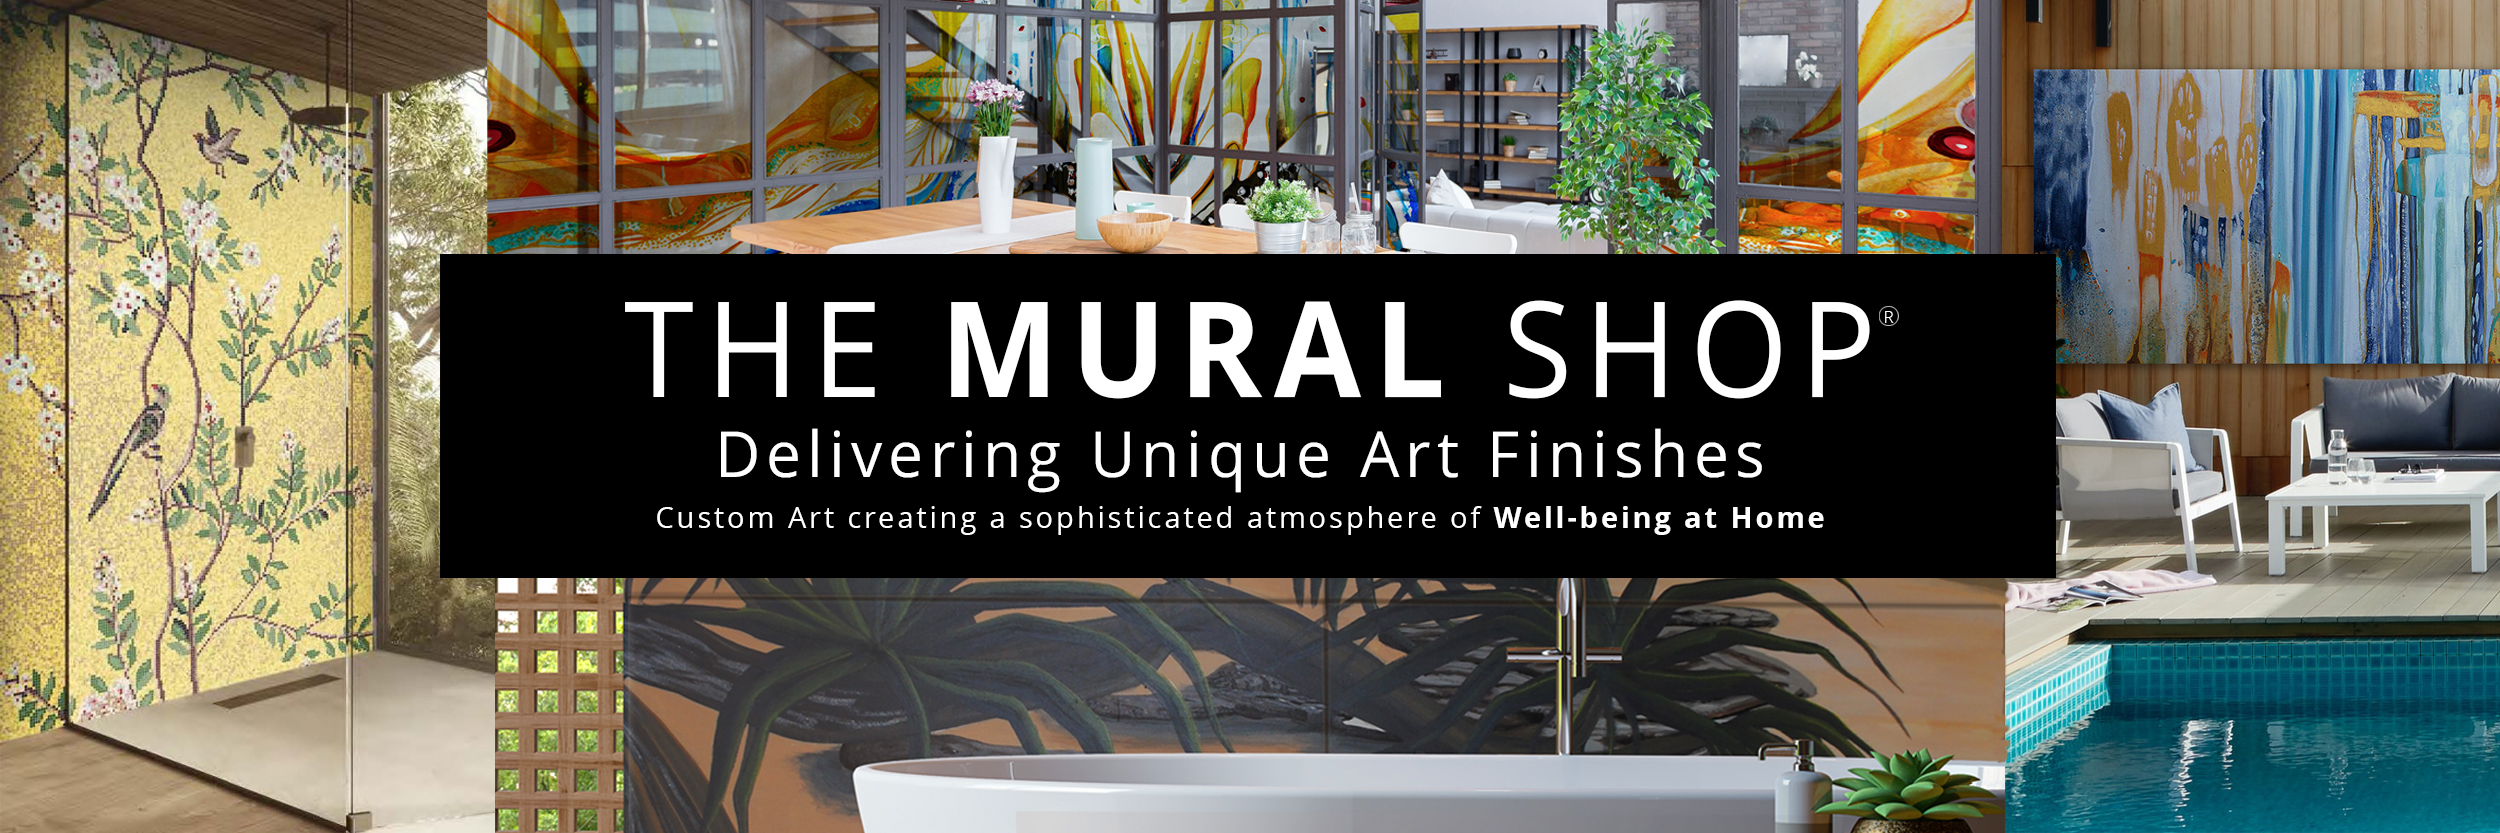 The Mural Shop Delivering Unique Art Finishes Home Page Banner